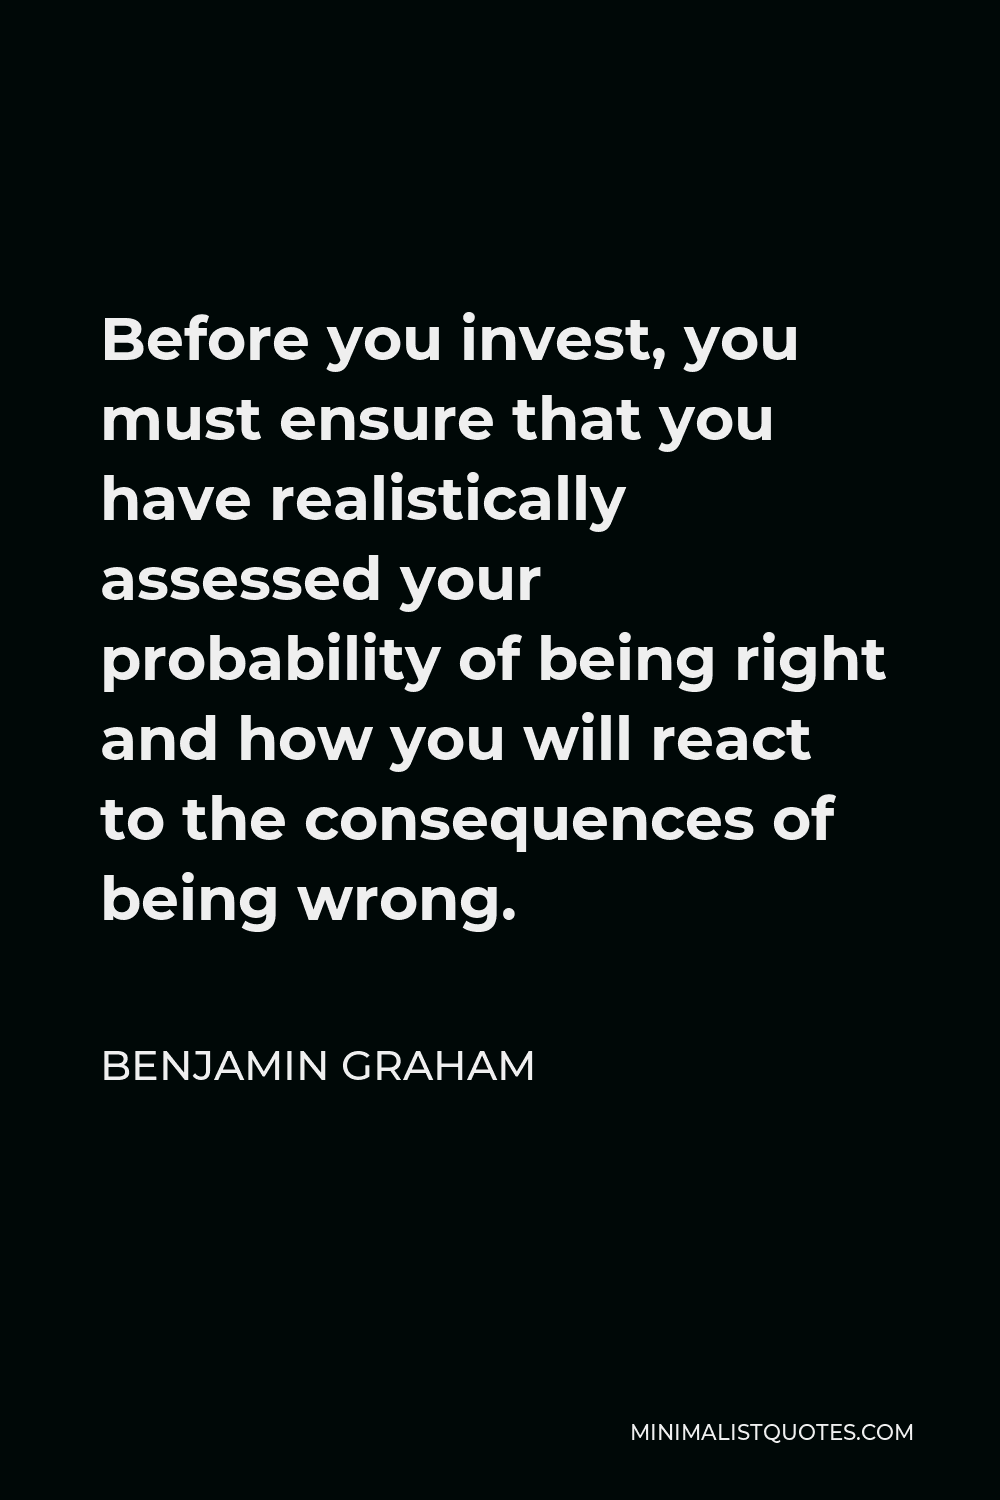 Benjamin Graham Quote - Before you invest, you must ensure that you have realistically assessed your probability of being right and how you will react to the consequences of being wrong.